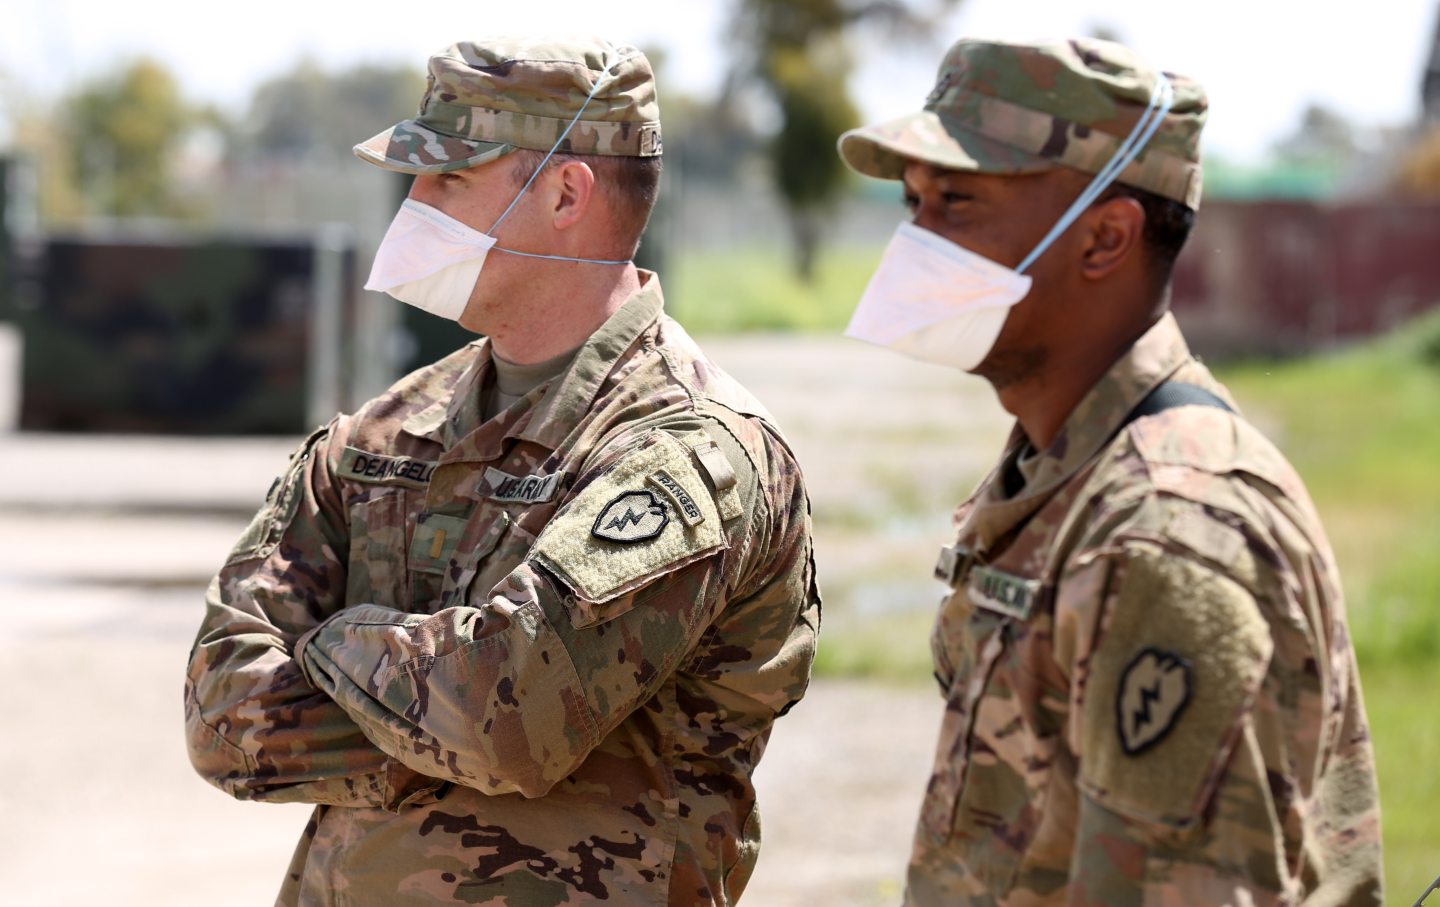 US forces wearing protective gear on an air base